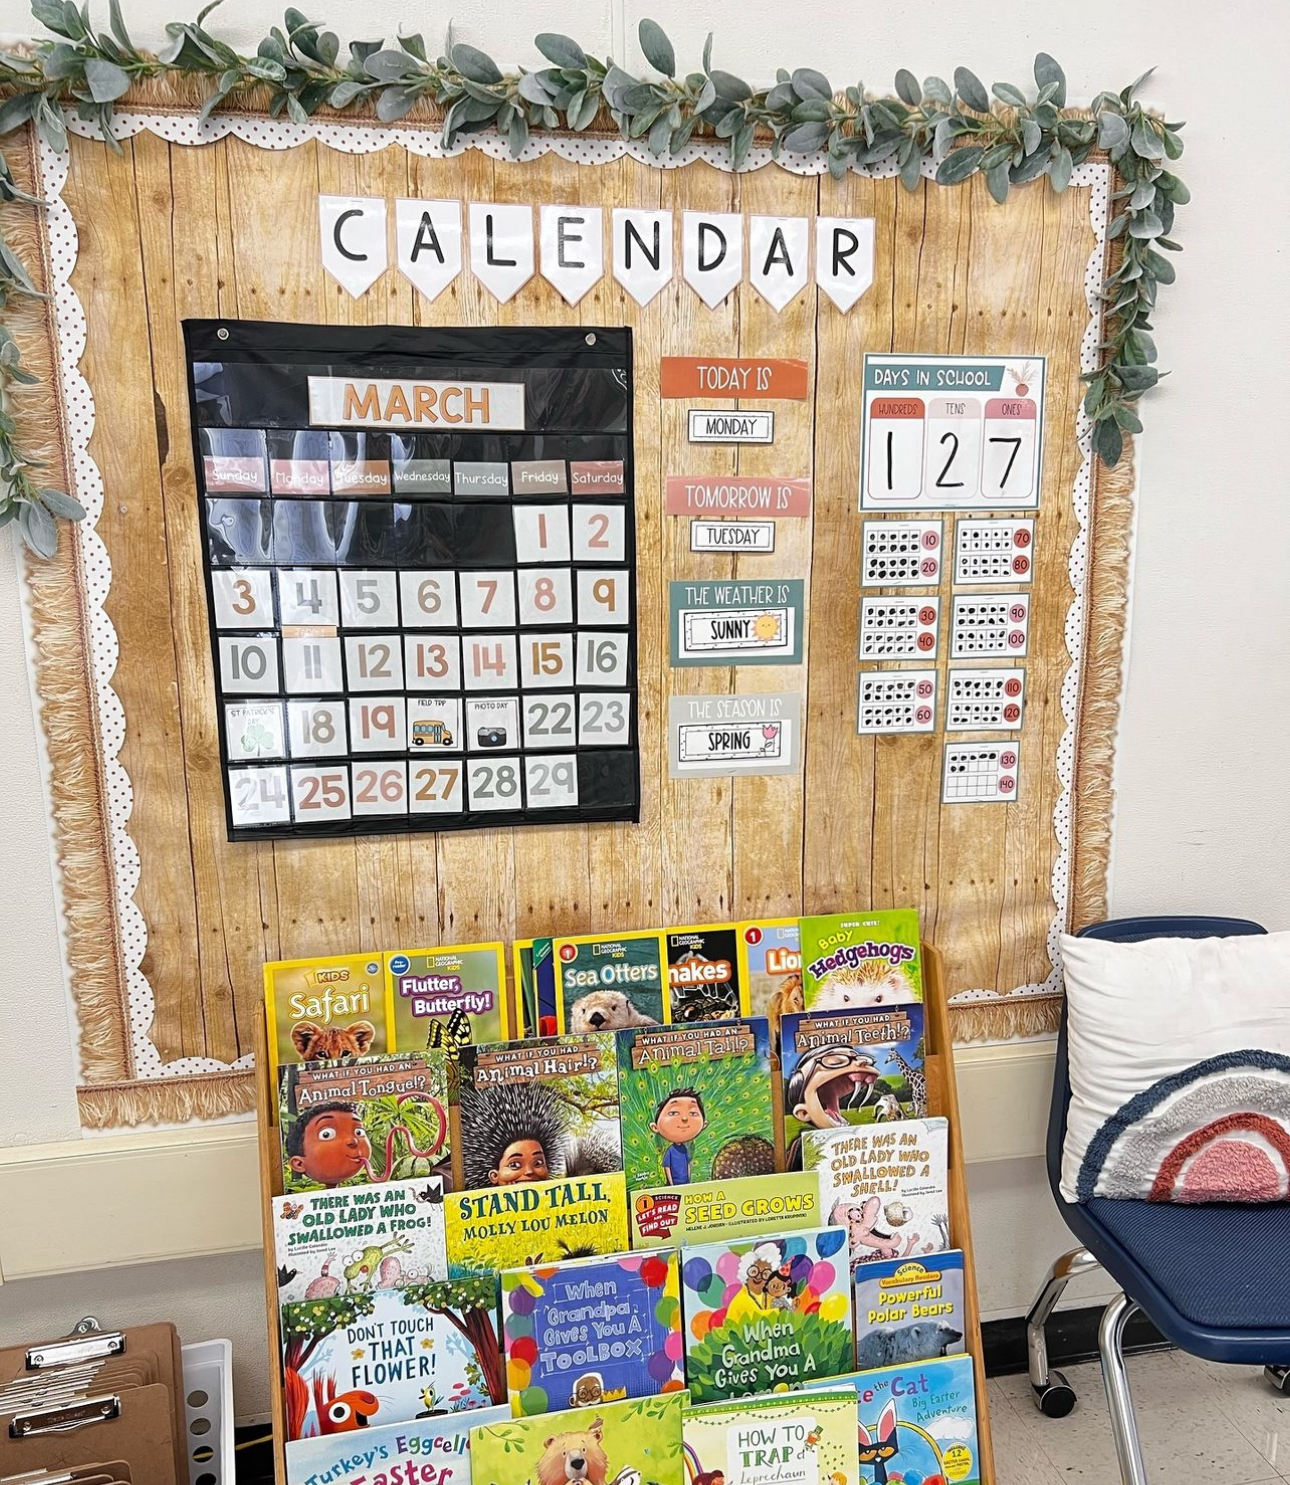 This image shows a calendar bulletin board with greenery hanging from the top of the display. 